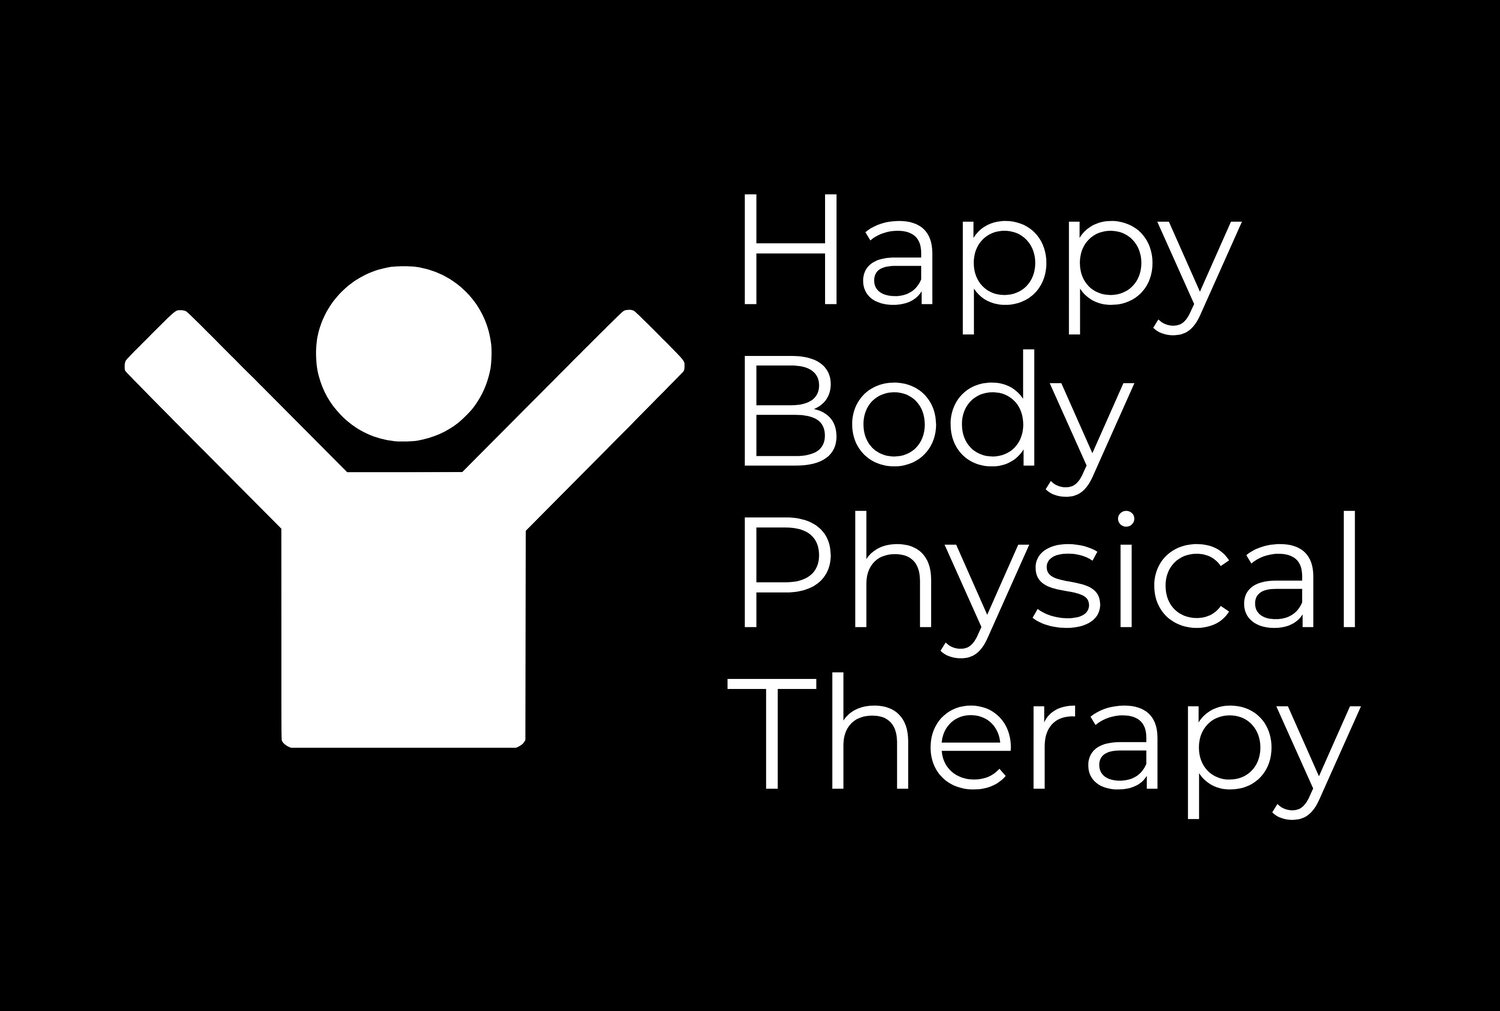 Happy Body Physical Therapy